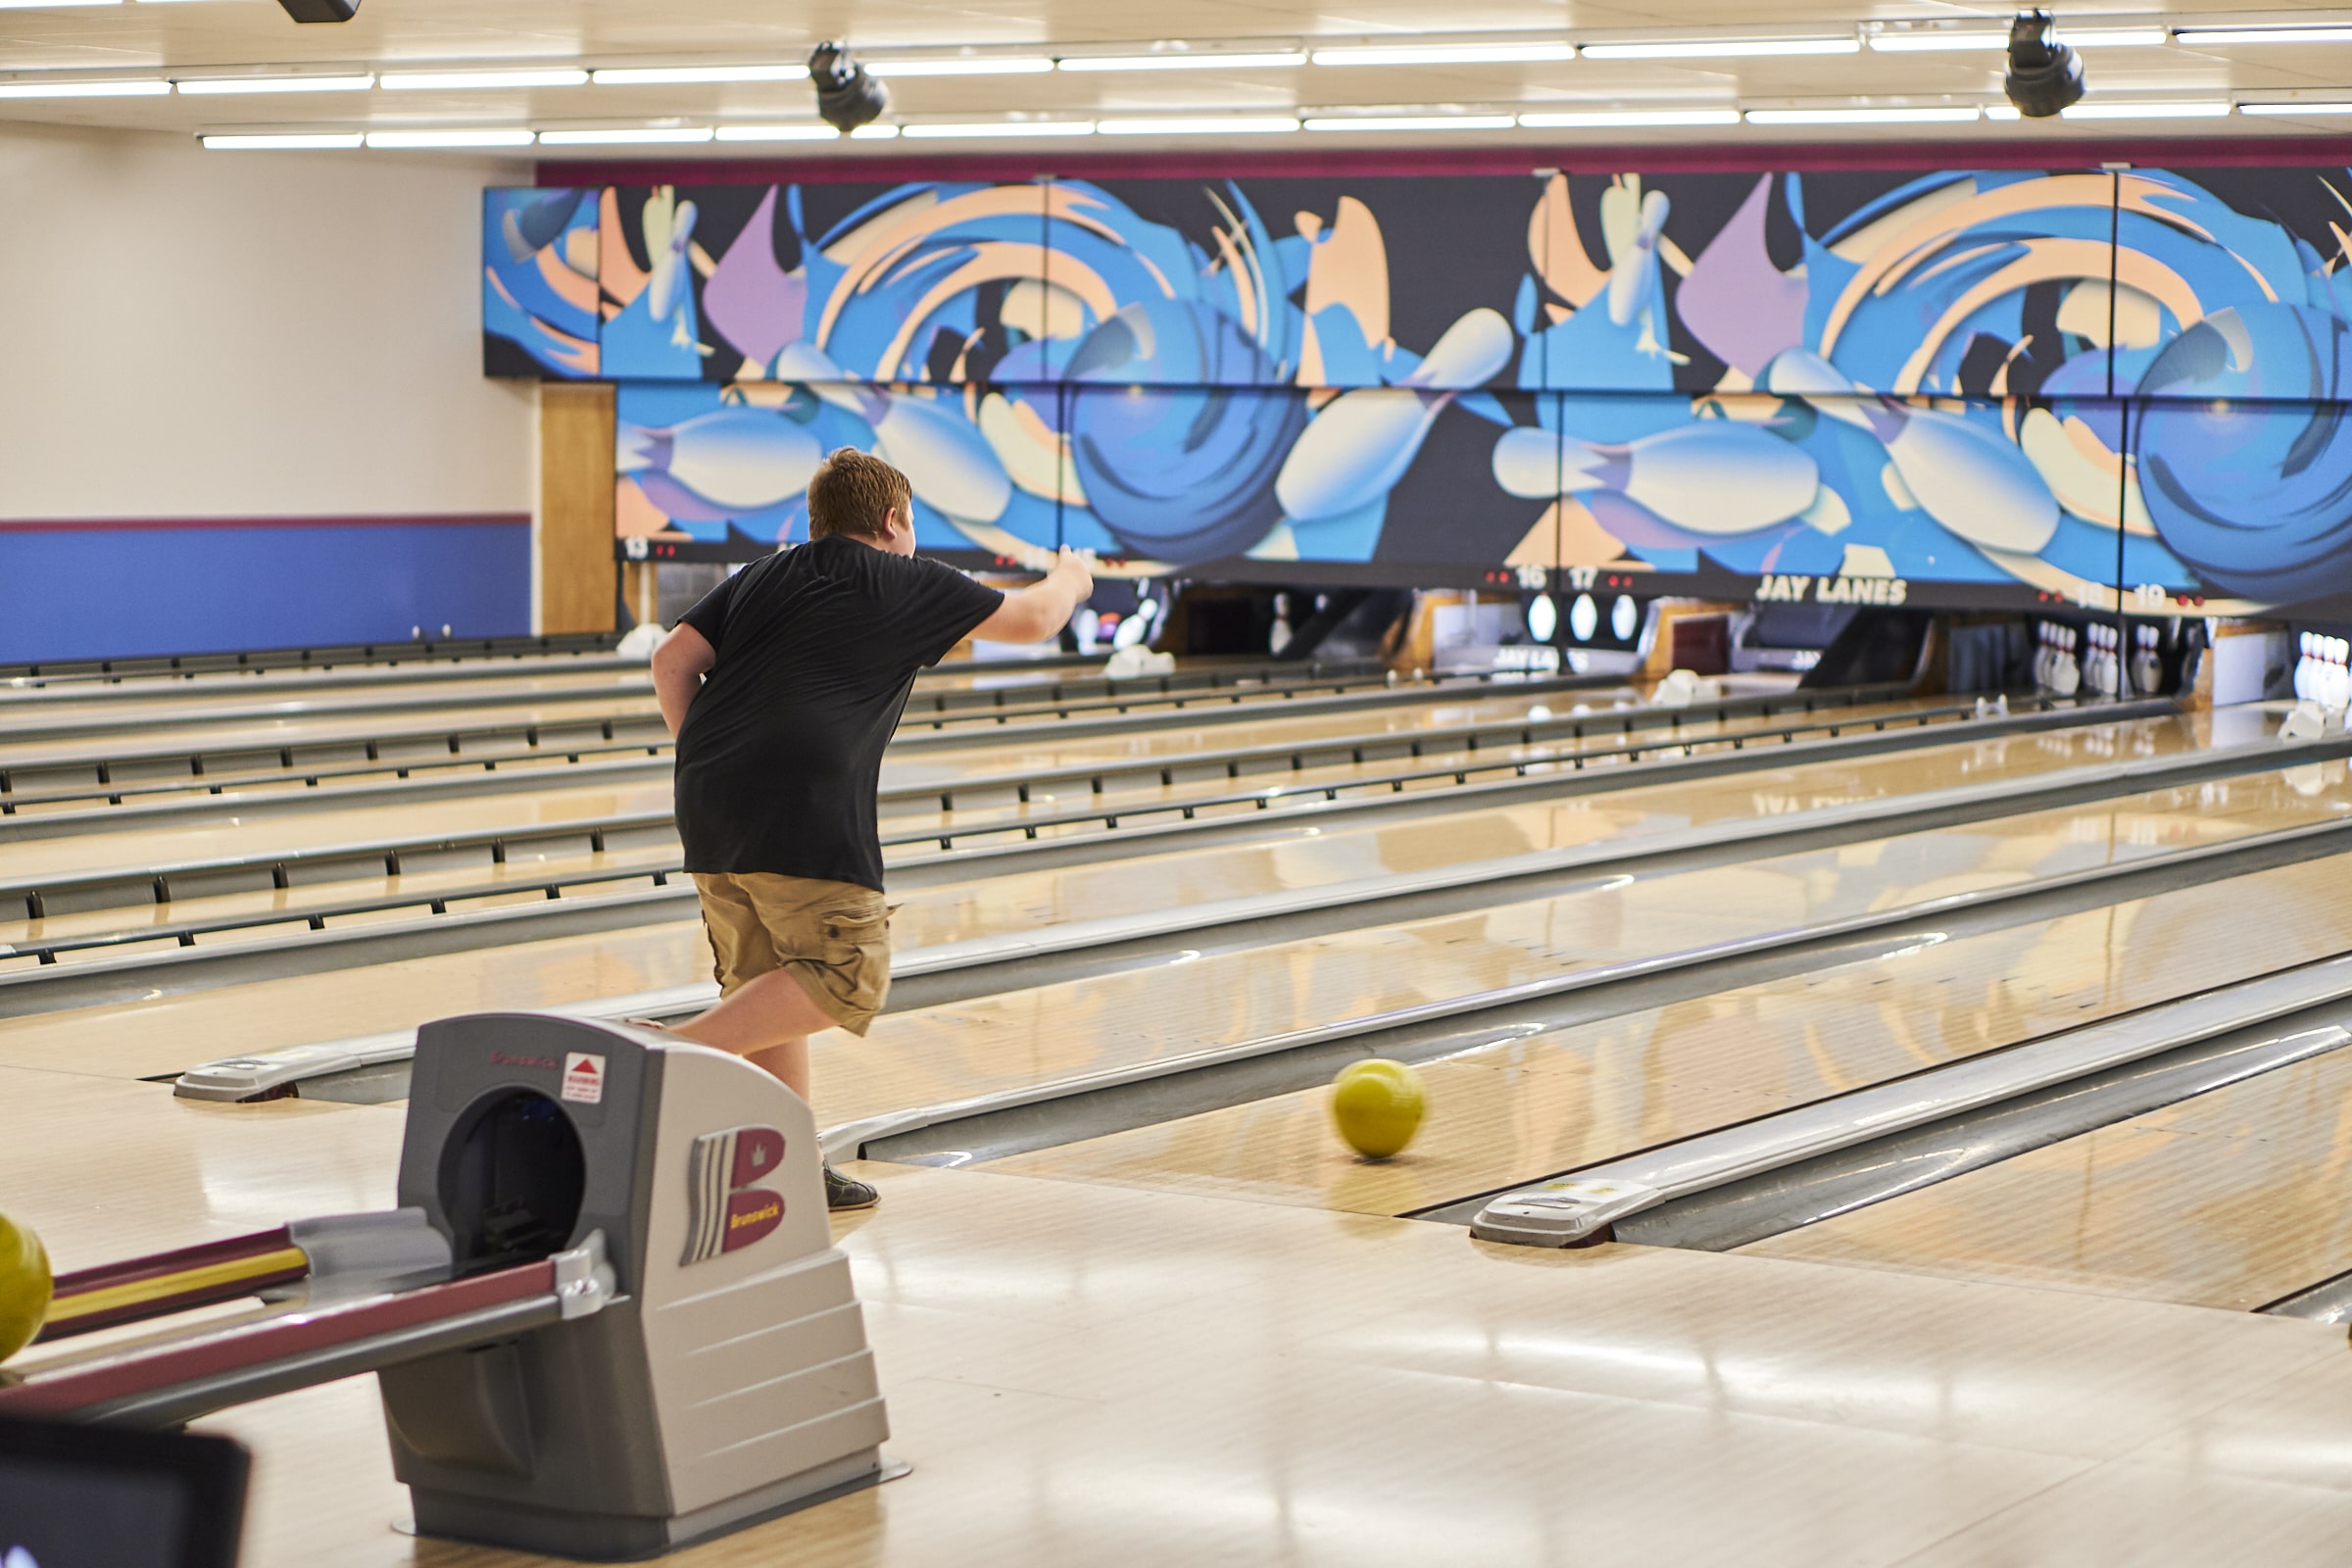 Corporate Team Building with a Twist: Organizing a Memorable Bowling Event